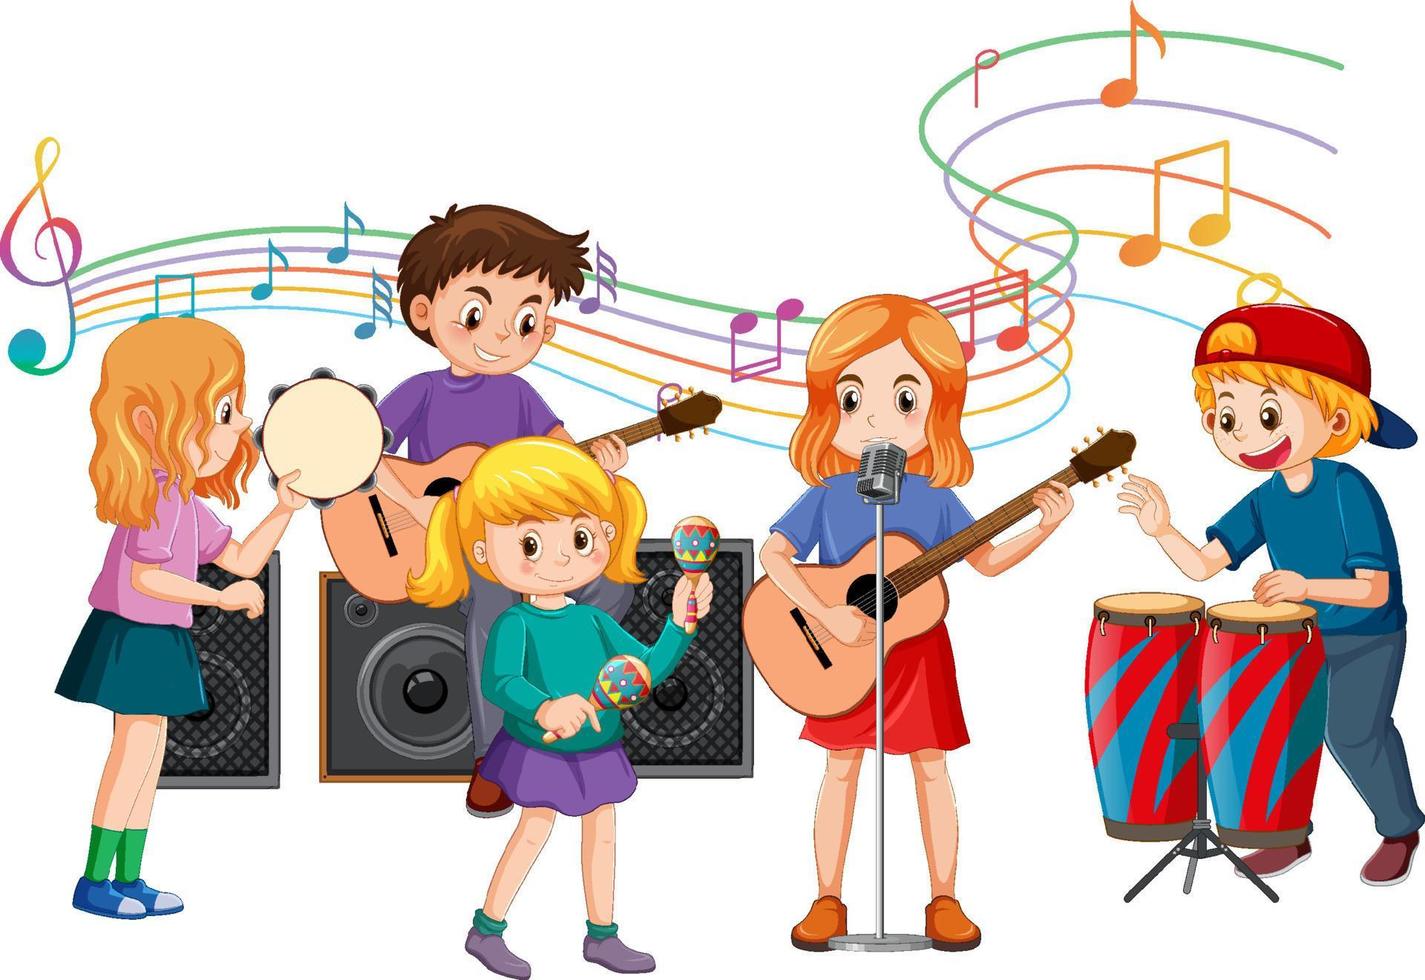 Children playing different musical instruments vector